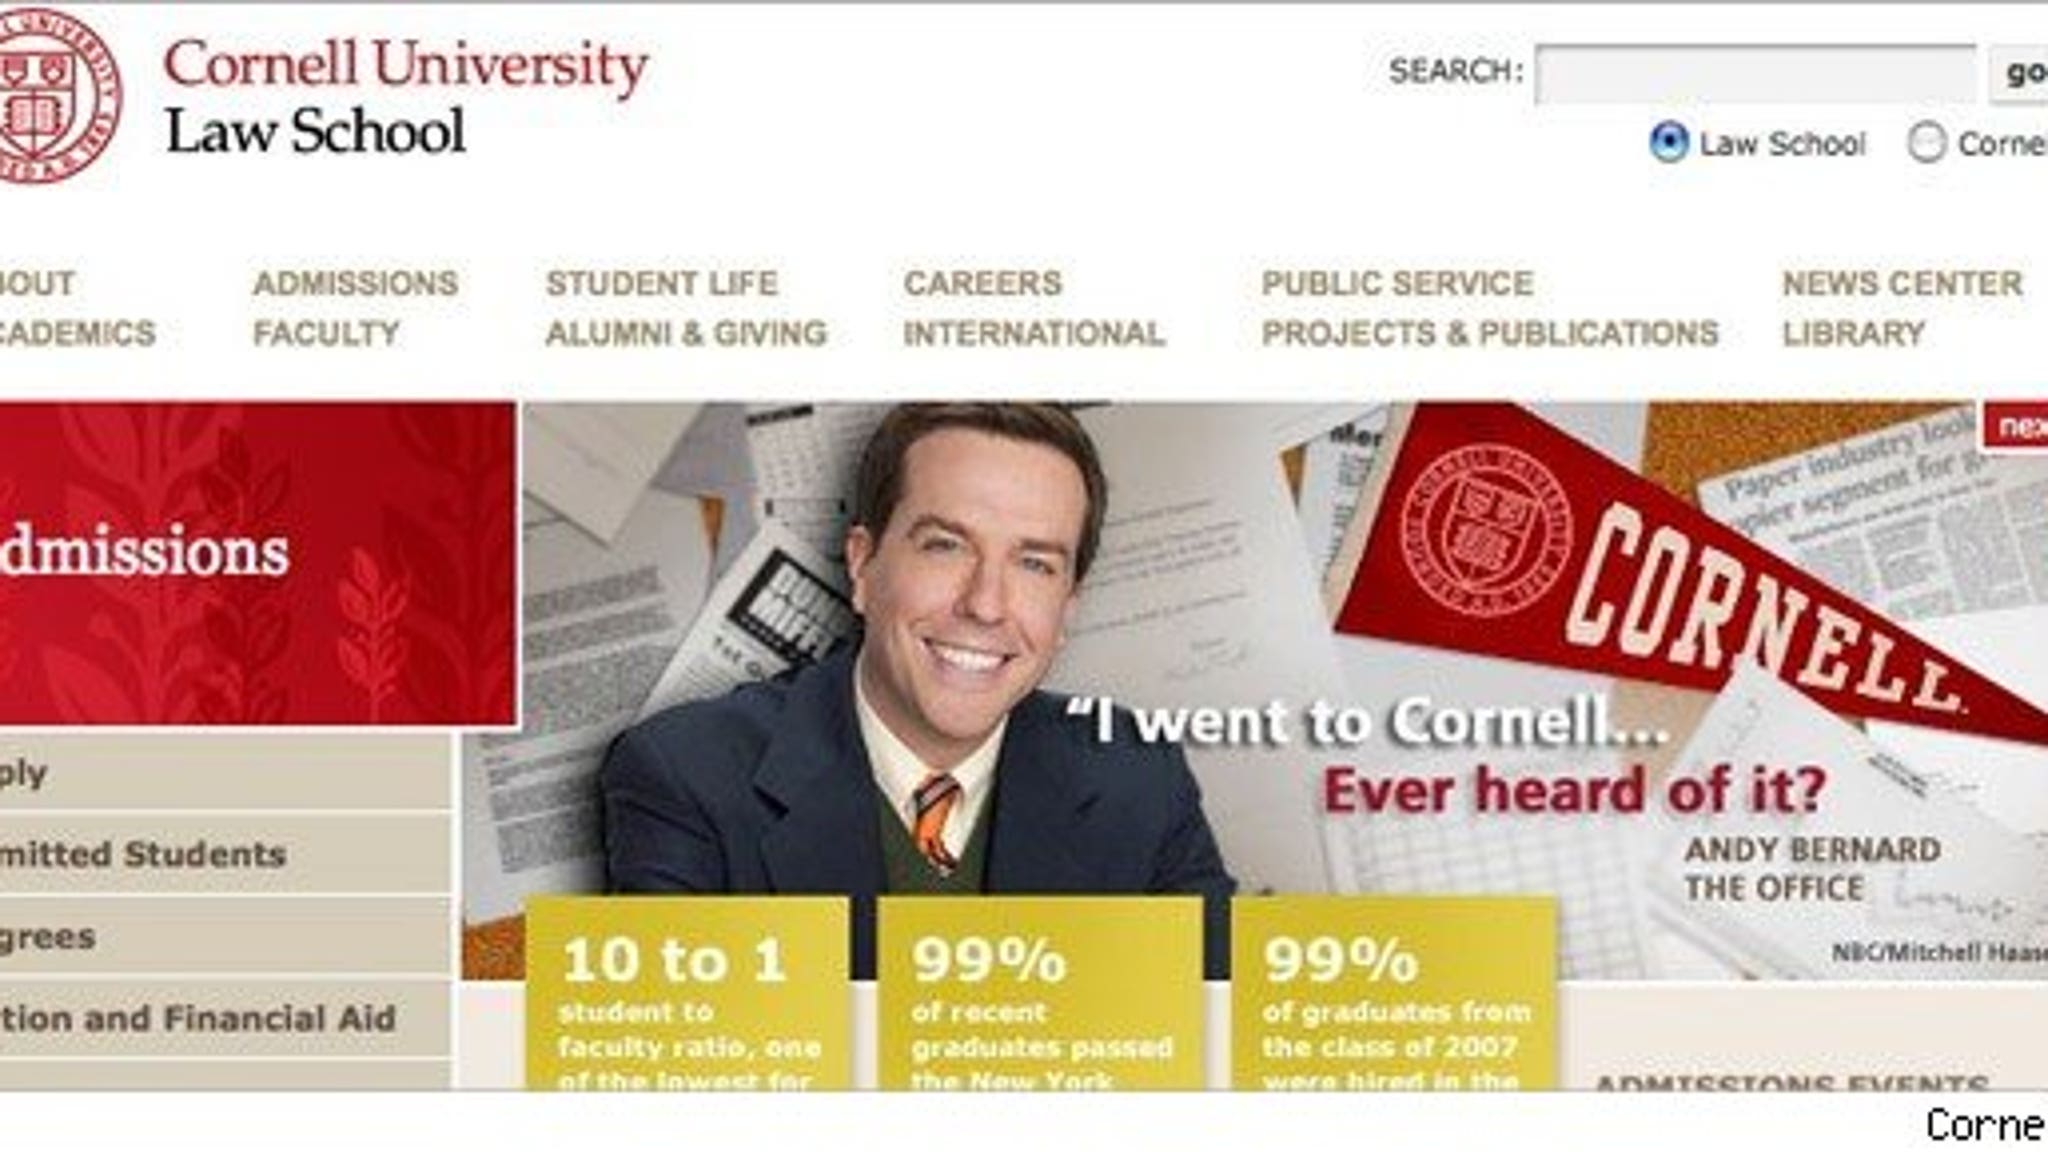 Office' Star -- The Face of Cornell Law